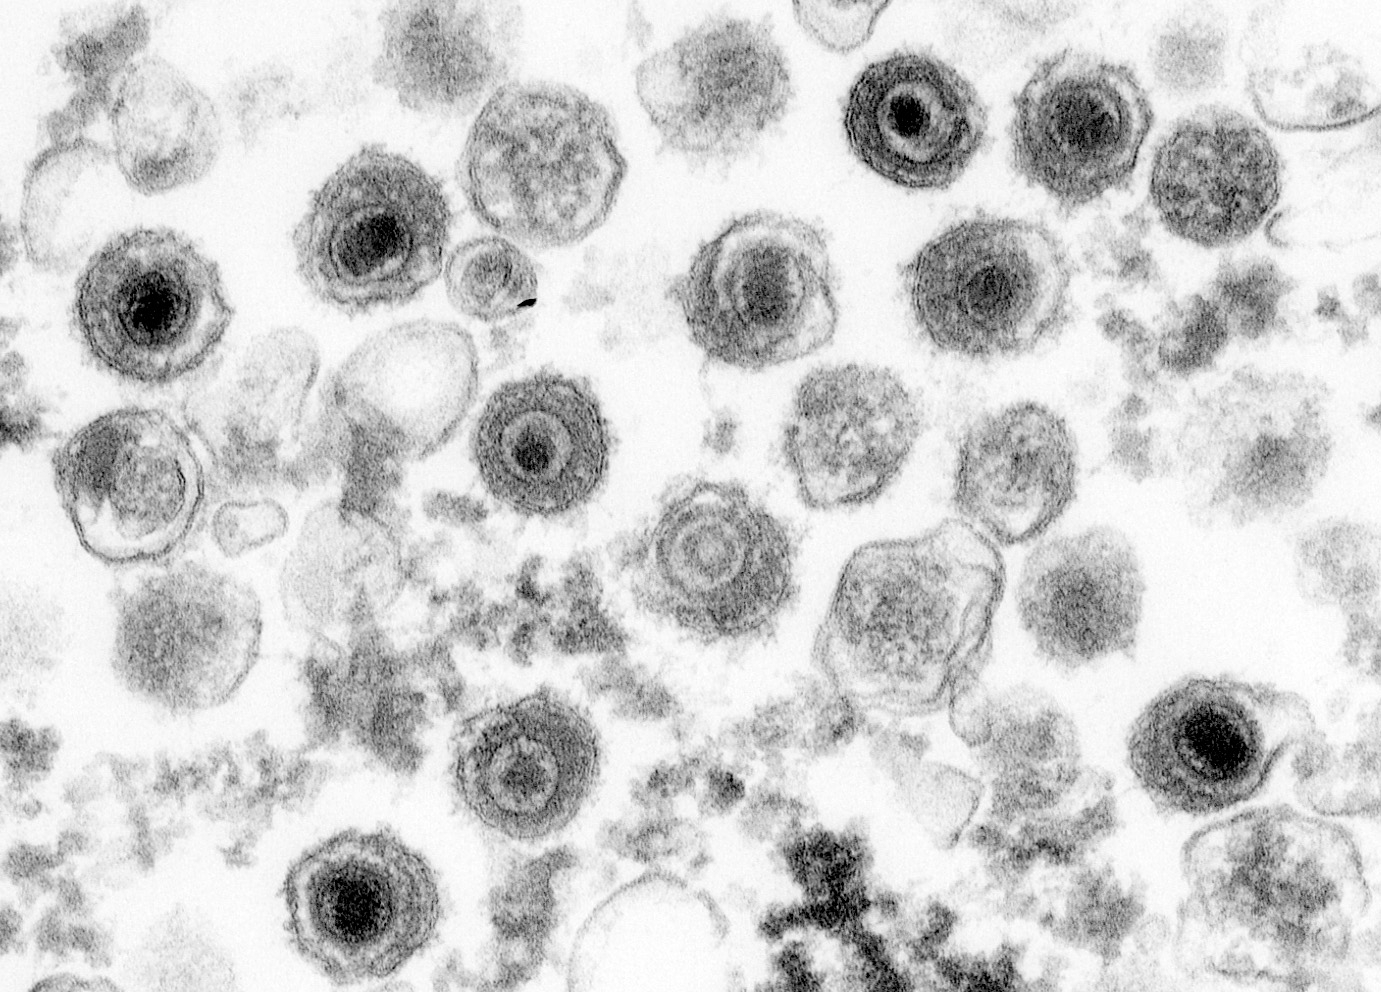 Electron microscope image of Epstein-Barr viruses. The photo shows spherical viral shells with content.